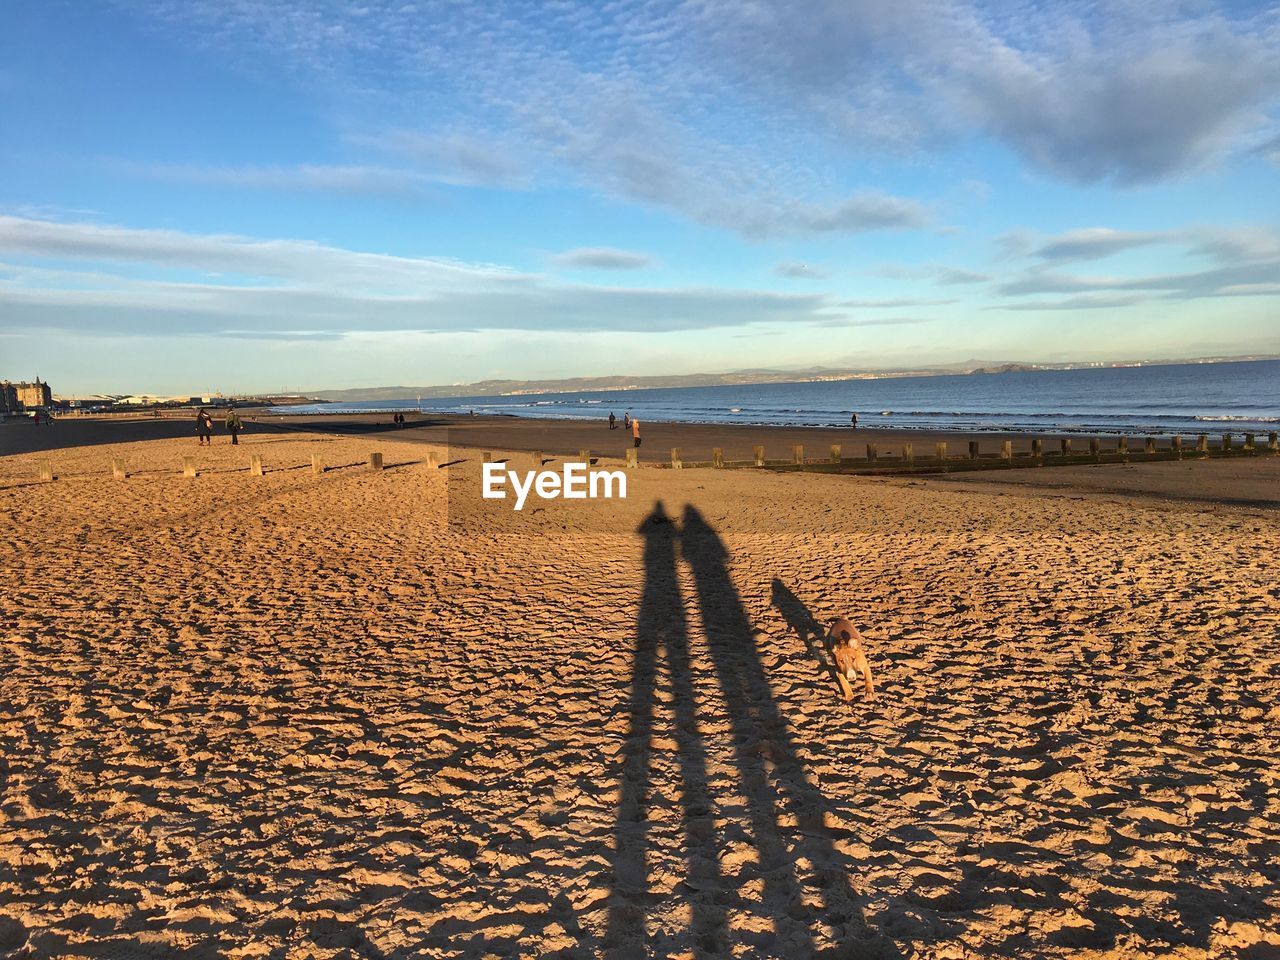 Shadow of people on sand at beach against sky